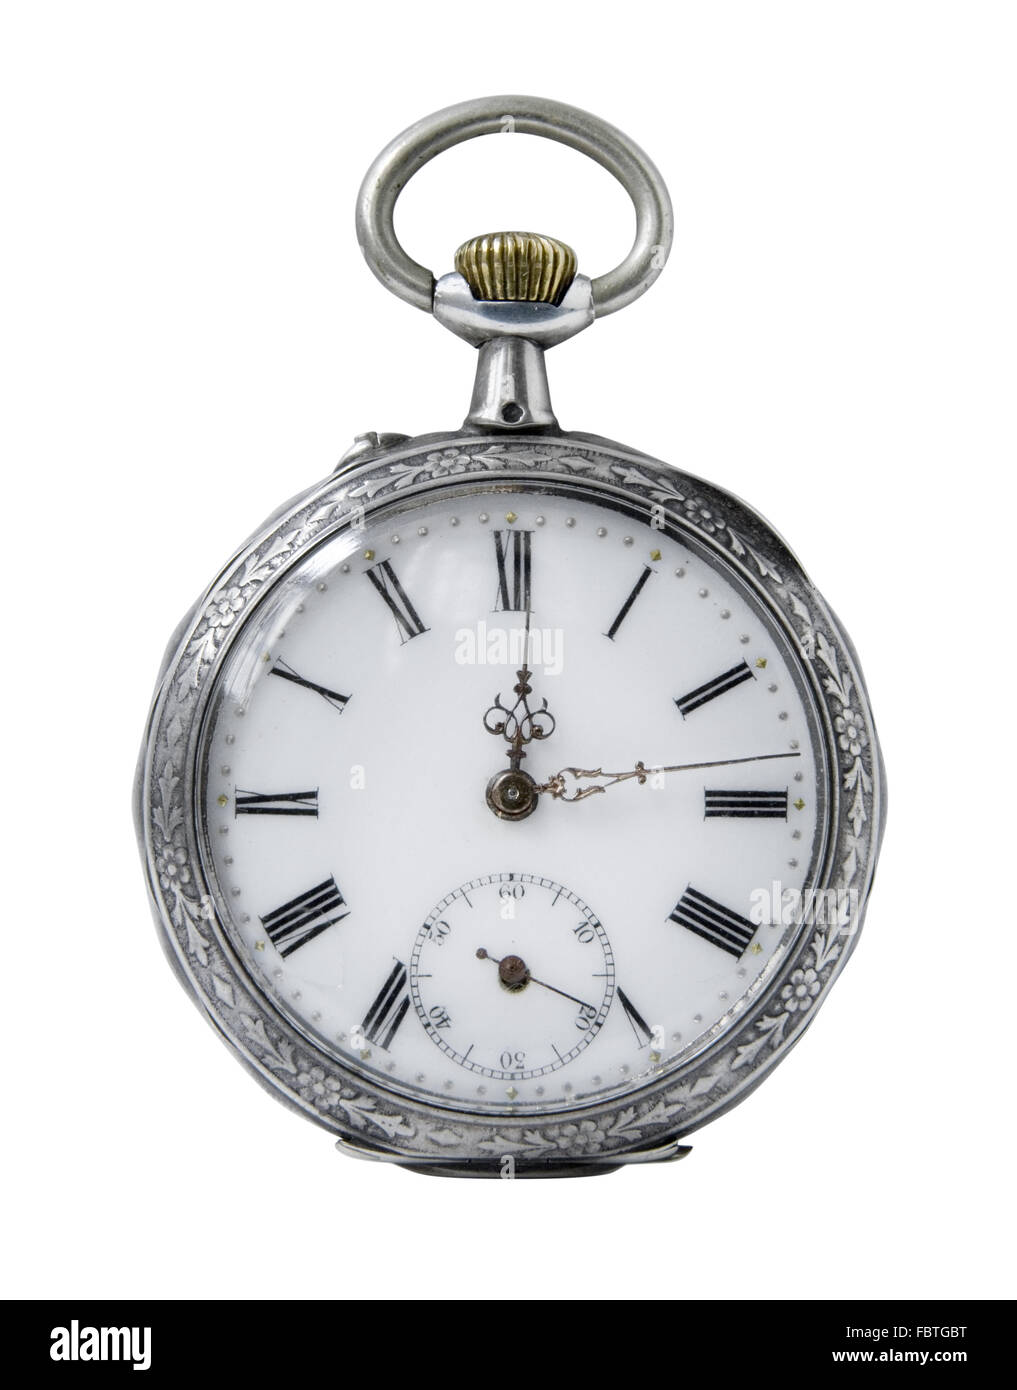 Old Pocket watch Stock Photo